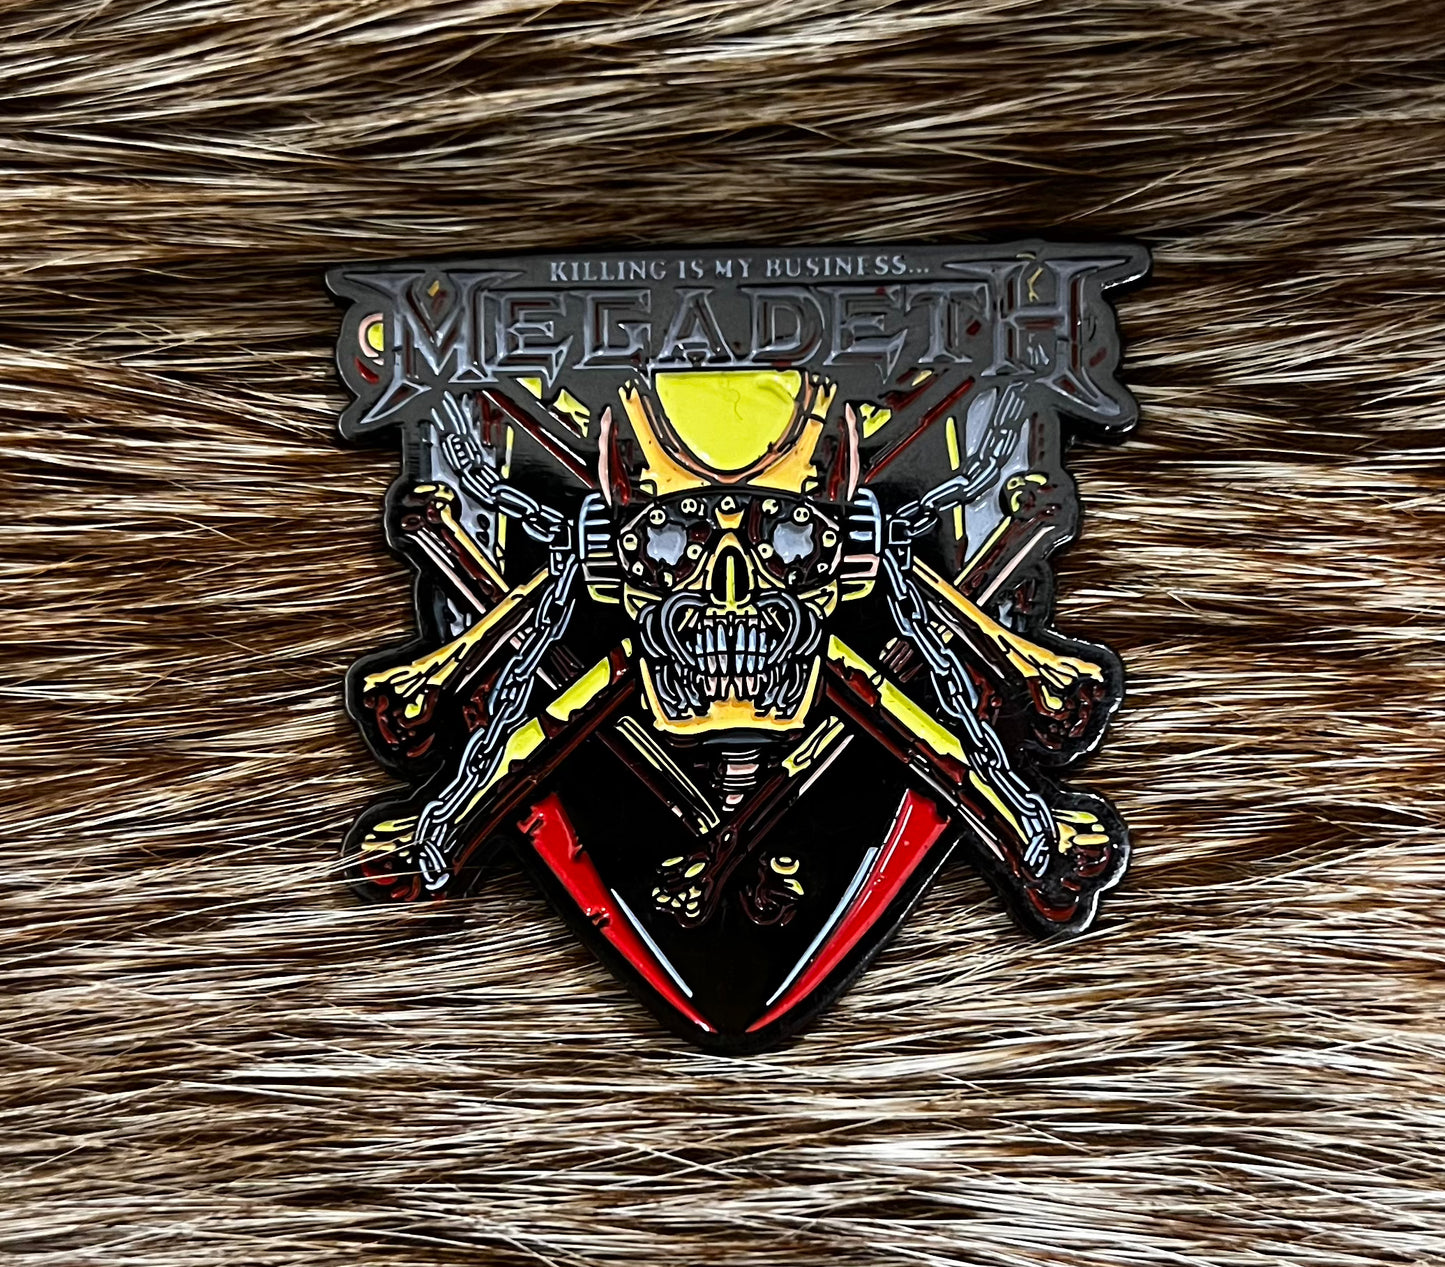 Megadeth - Killing Is My Business Pin